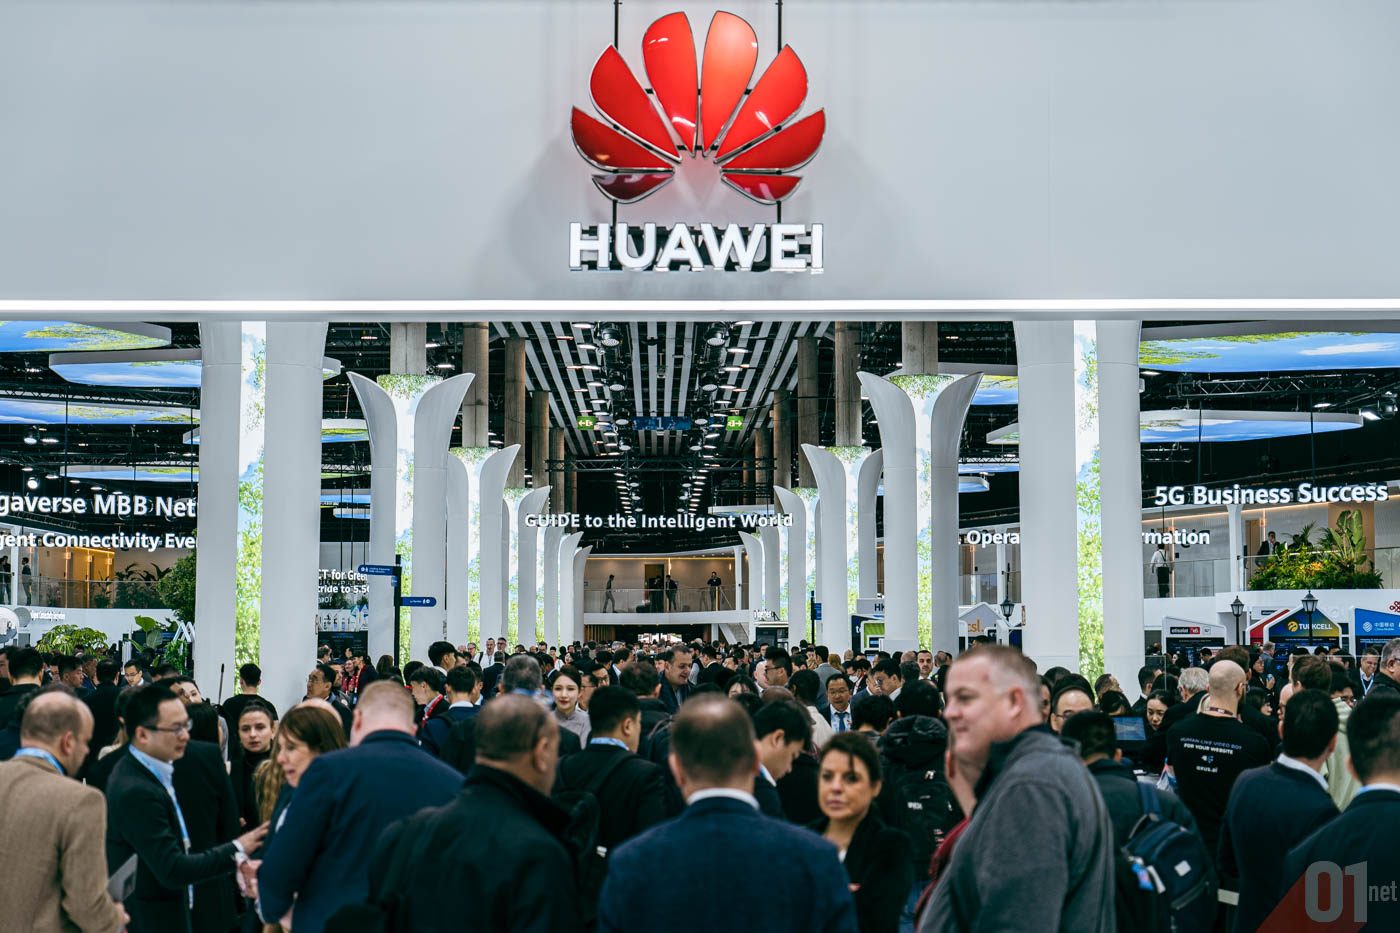 Hit but never sunk, Huawei is stronger than ever